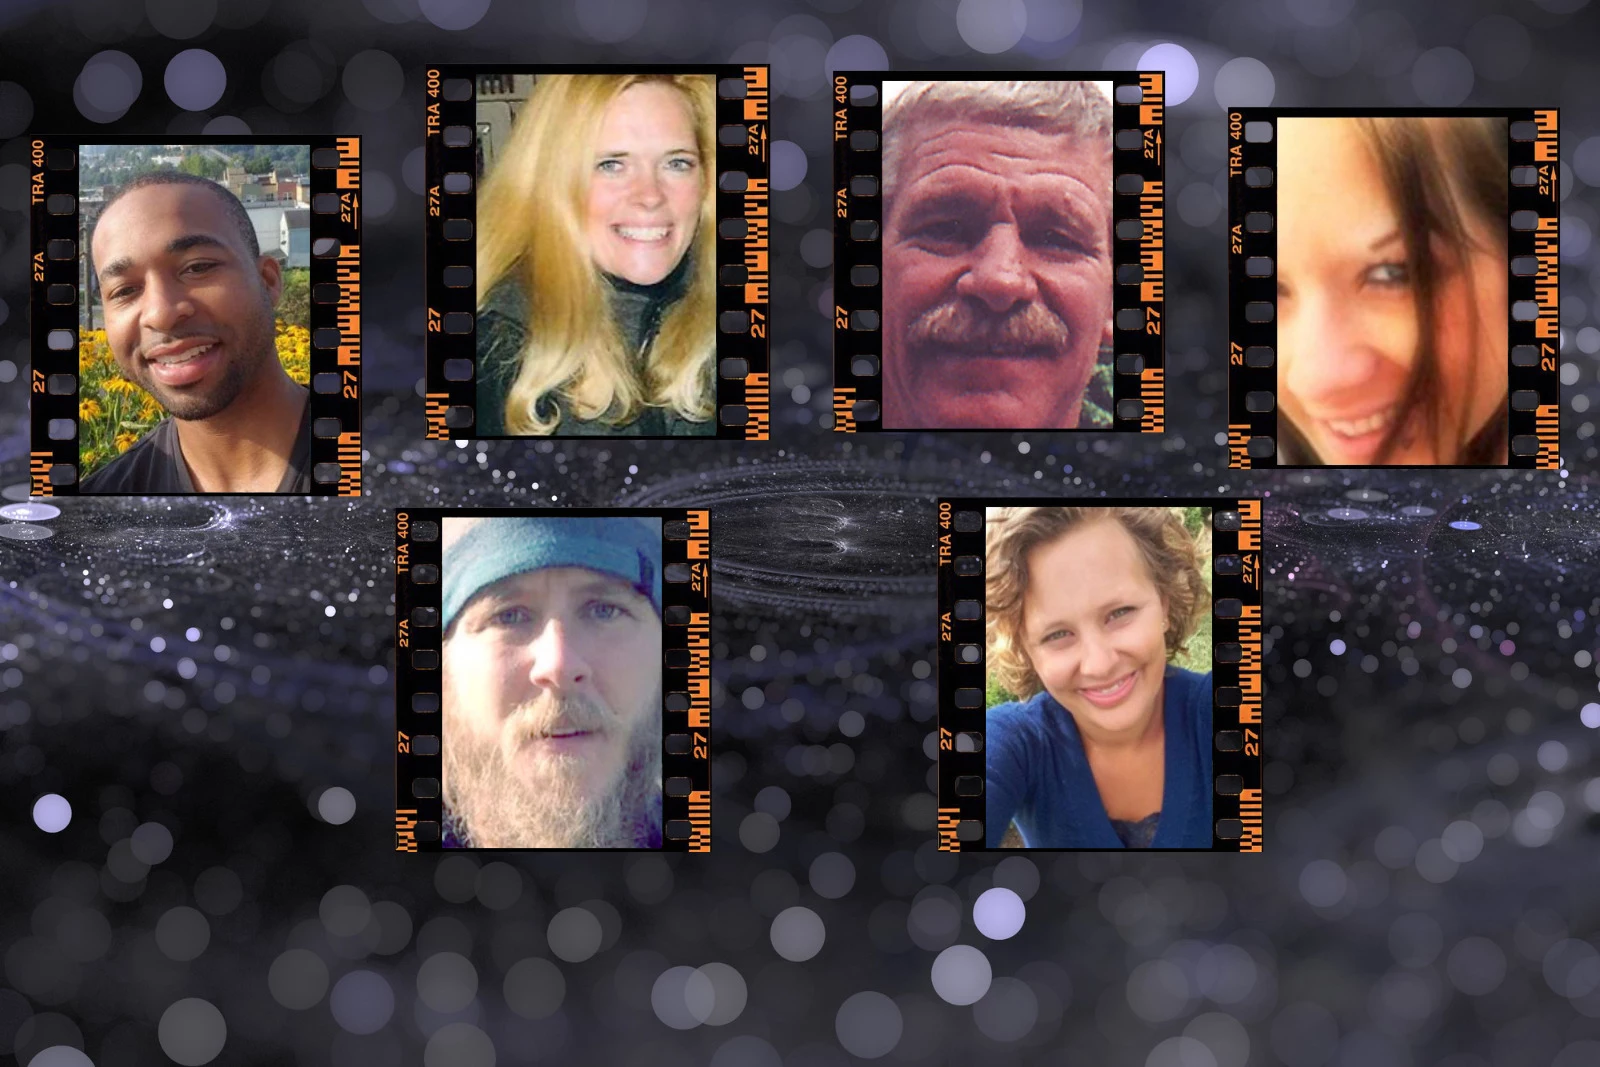 88 Unsolved Missing Persons Cases in Washington. Recognize Any?